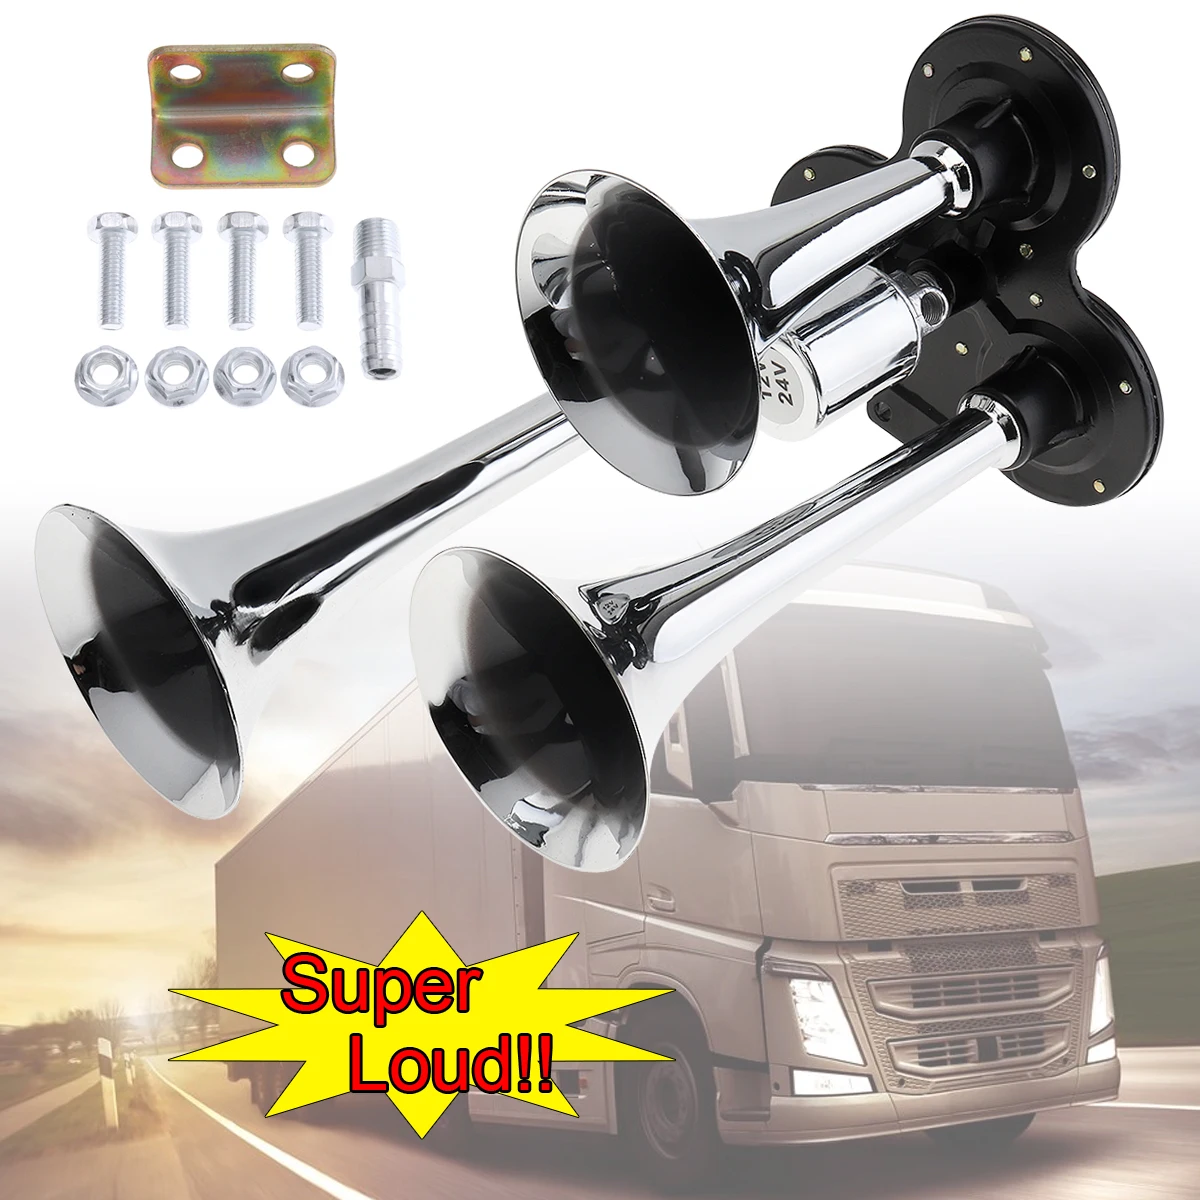 12V 178dB Super Loud Three Trumpet Electronically Controlled Car Air Horn  for Car Truck Boat Motorcycle Vehicles